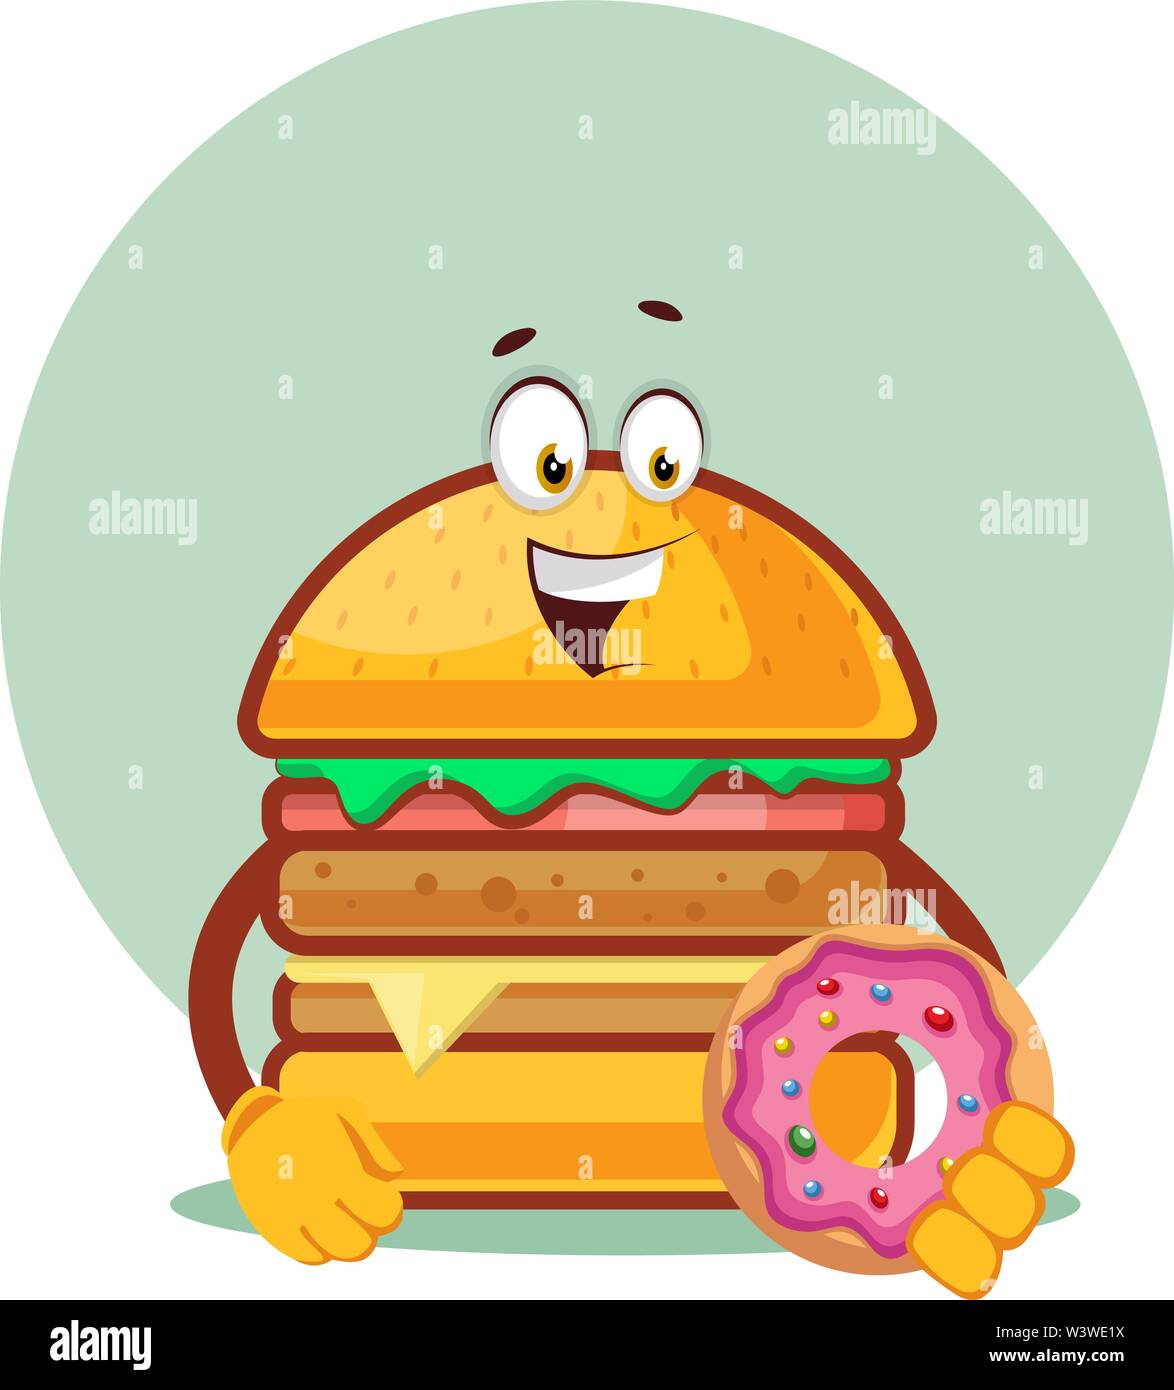 Burger is holding a doughnut, illustration, vector on white background. Stock Vector